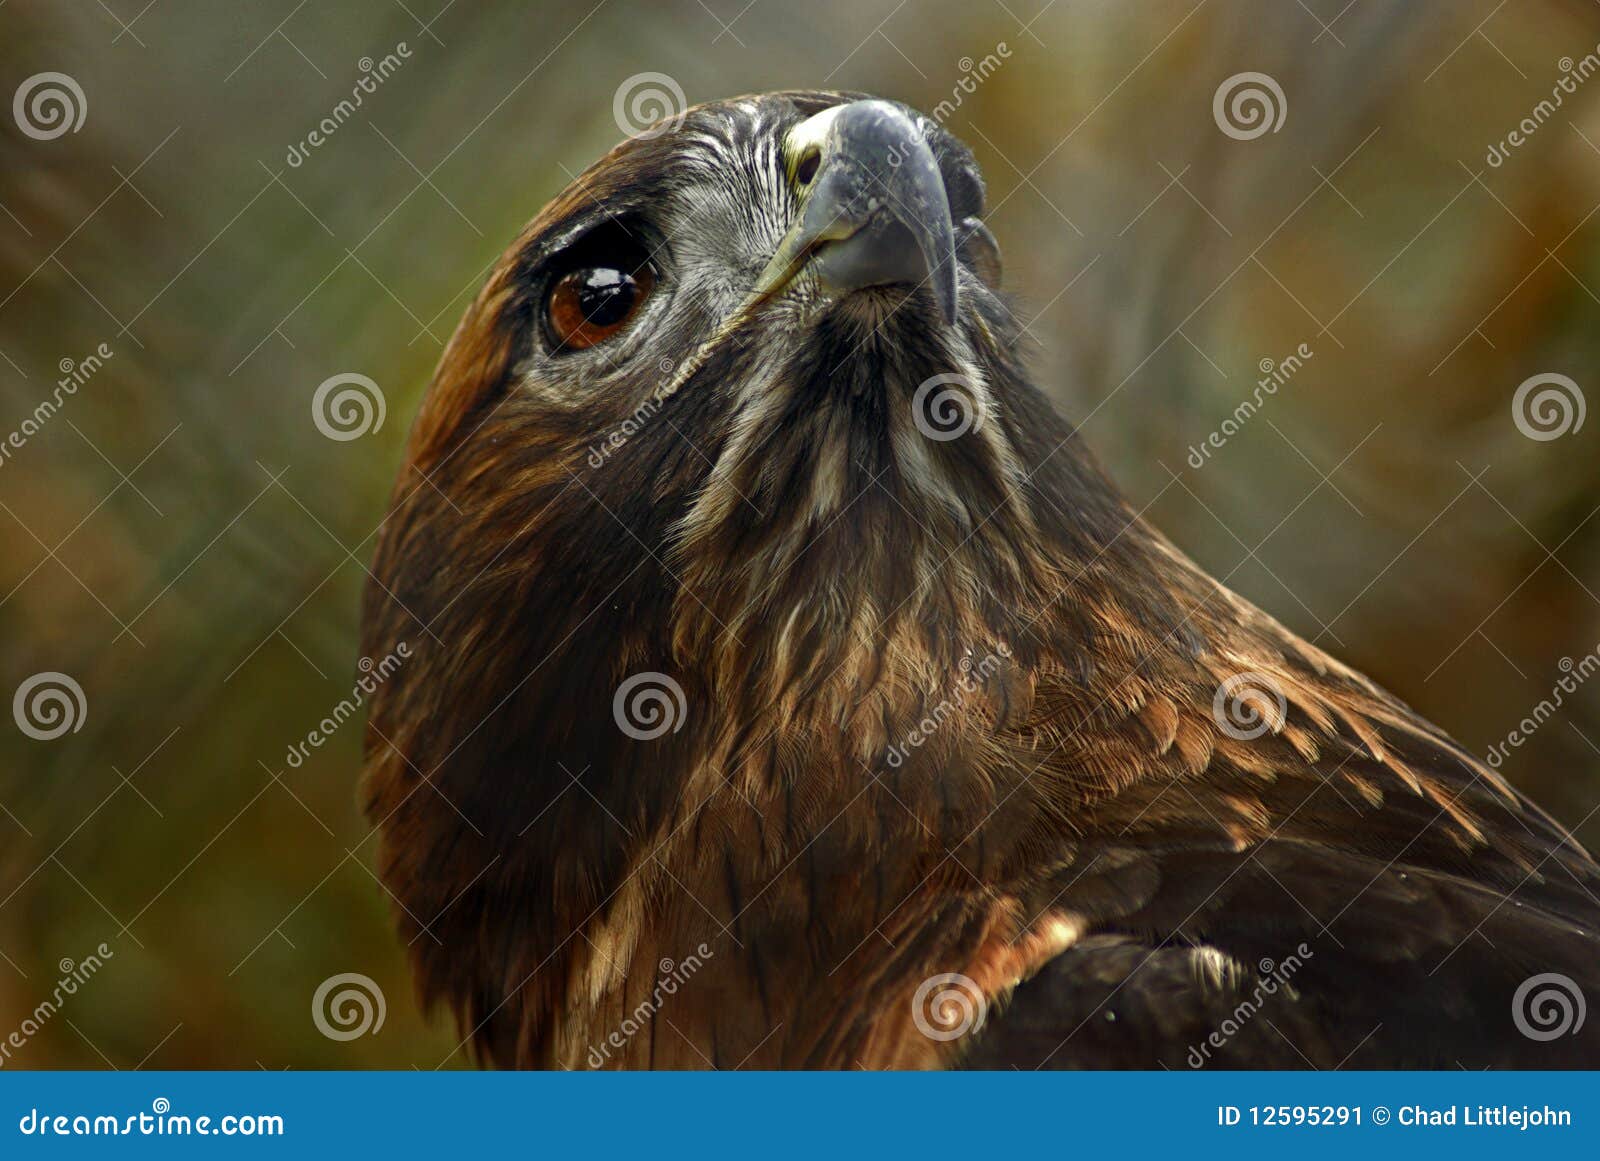 red tailed hawk portrait